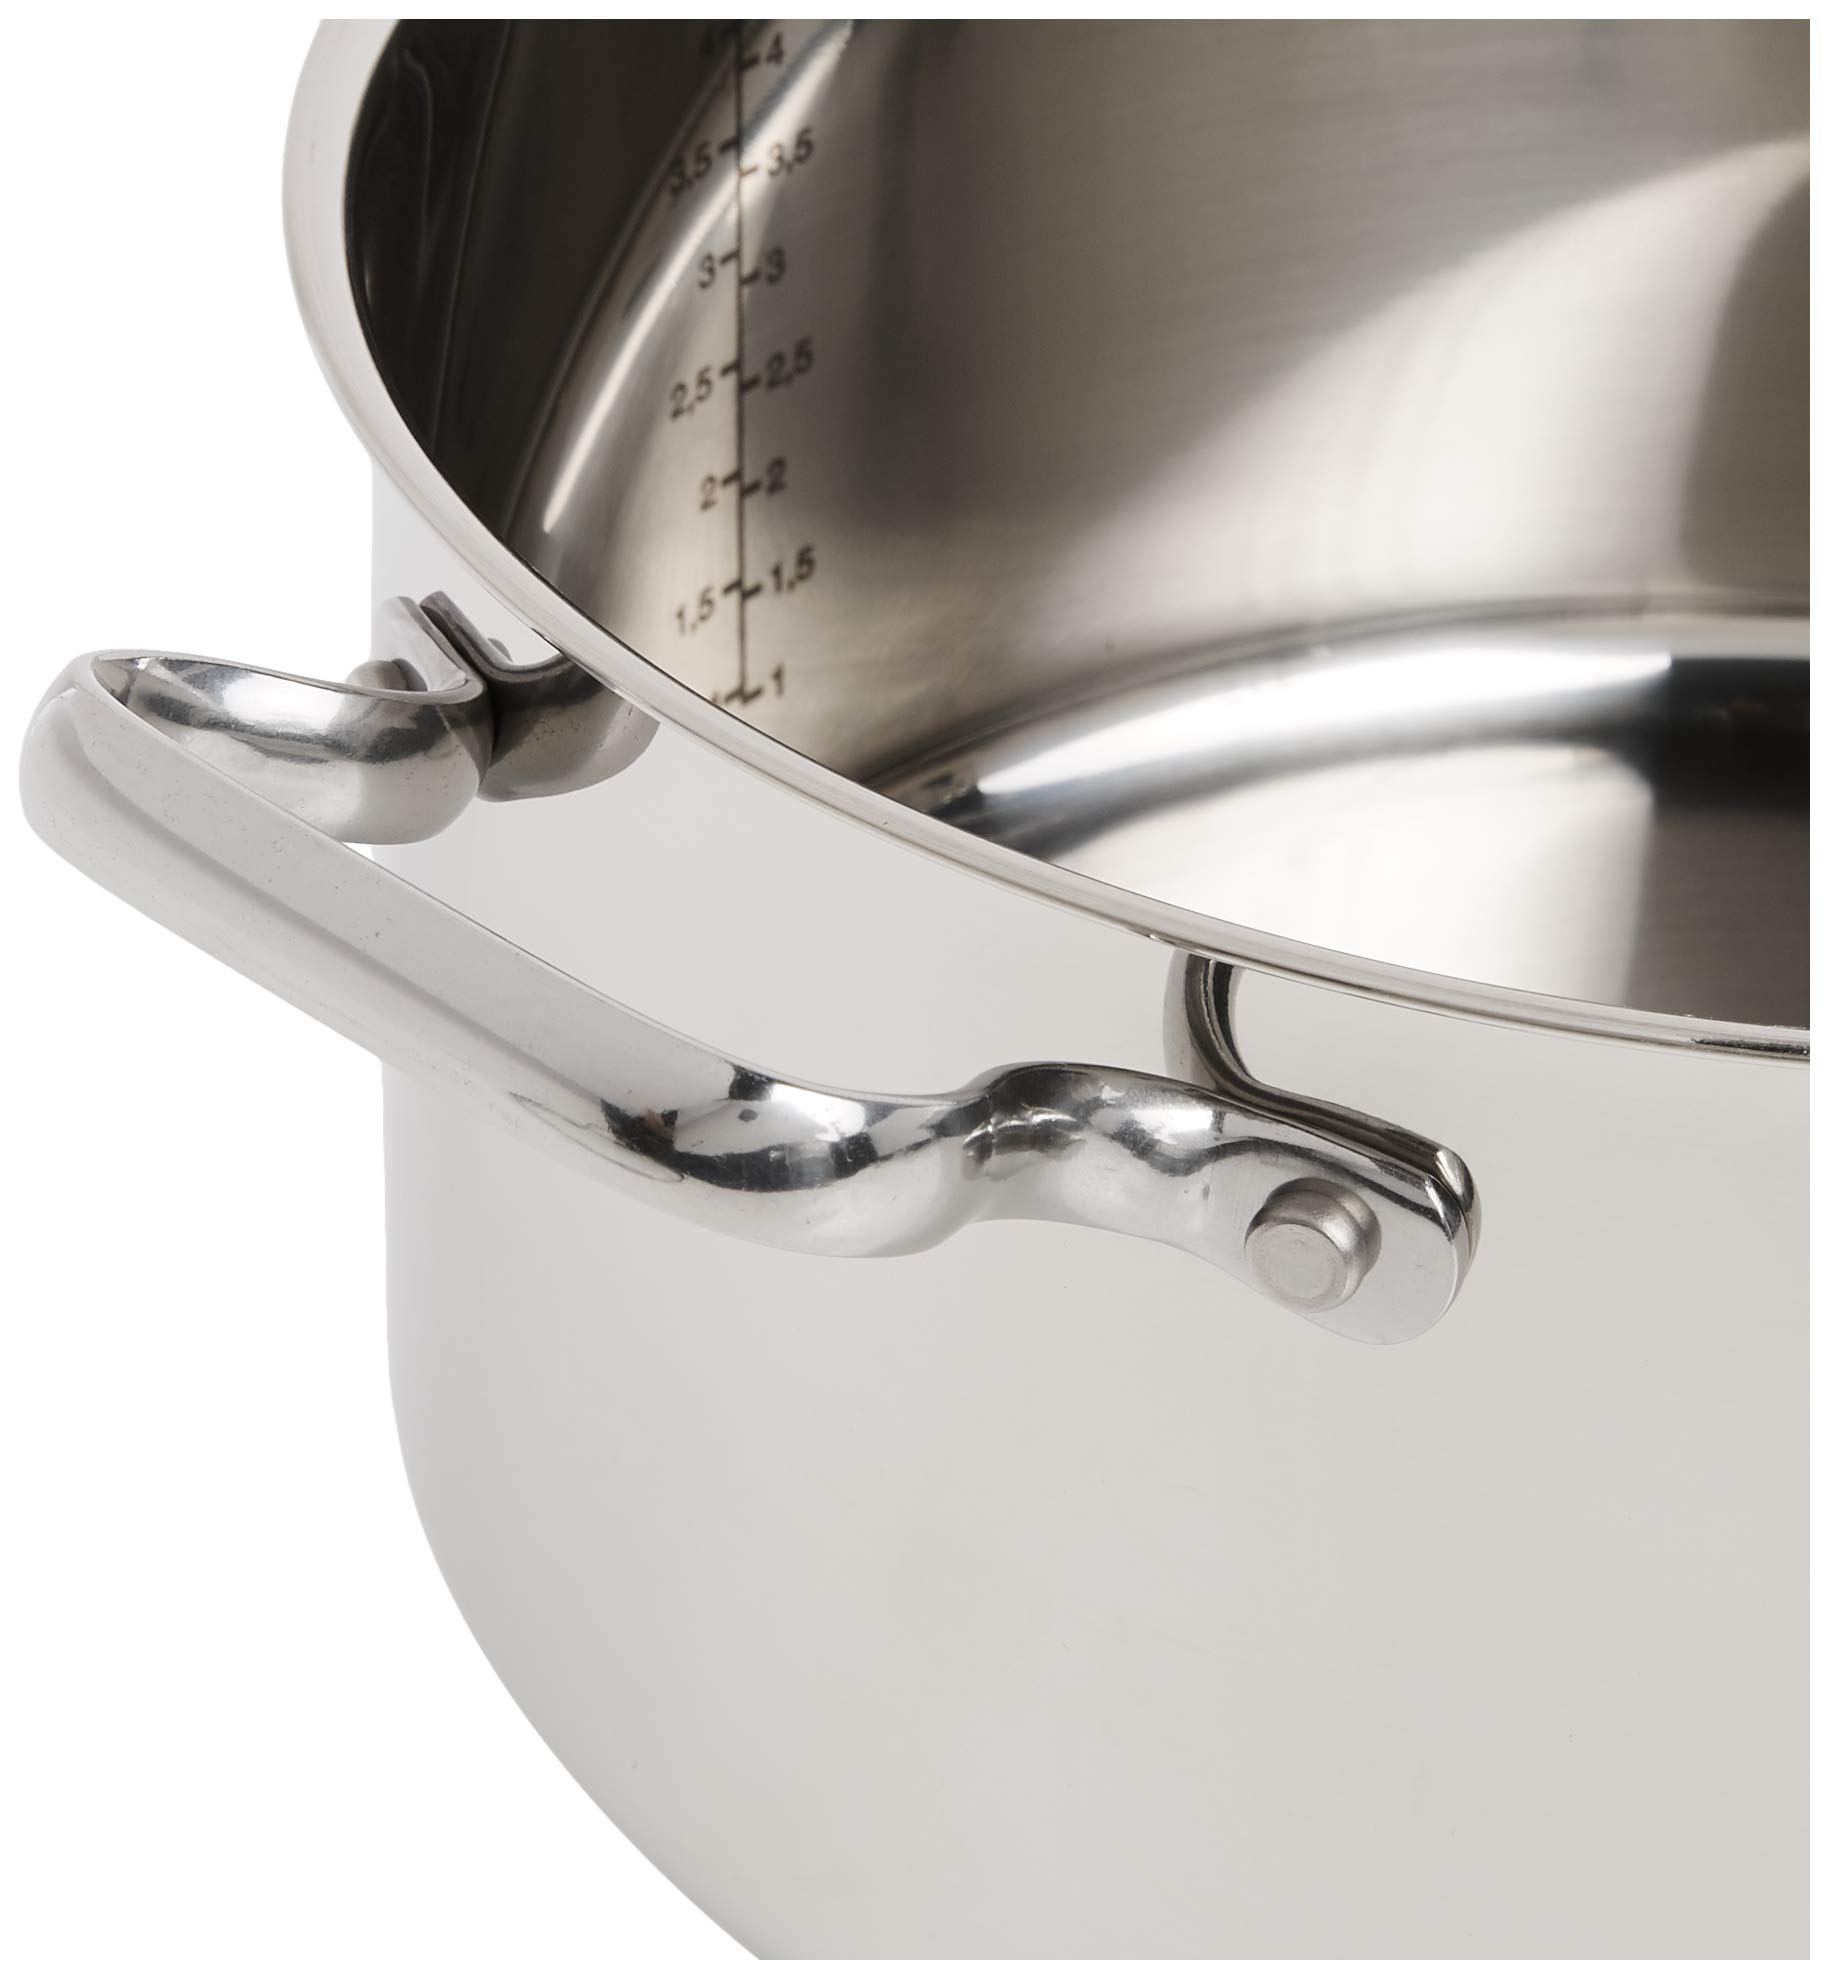 T-fal E75846 Performa Stainless Steel Dishwasher Safe Induction Compatible Dutch Oven Cookware, 5.5-Quart, Silver